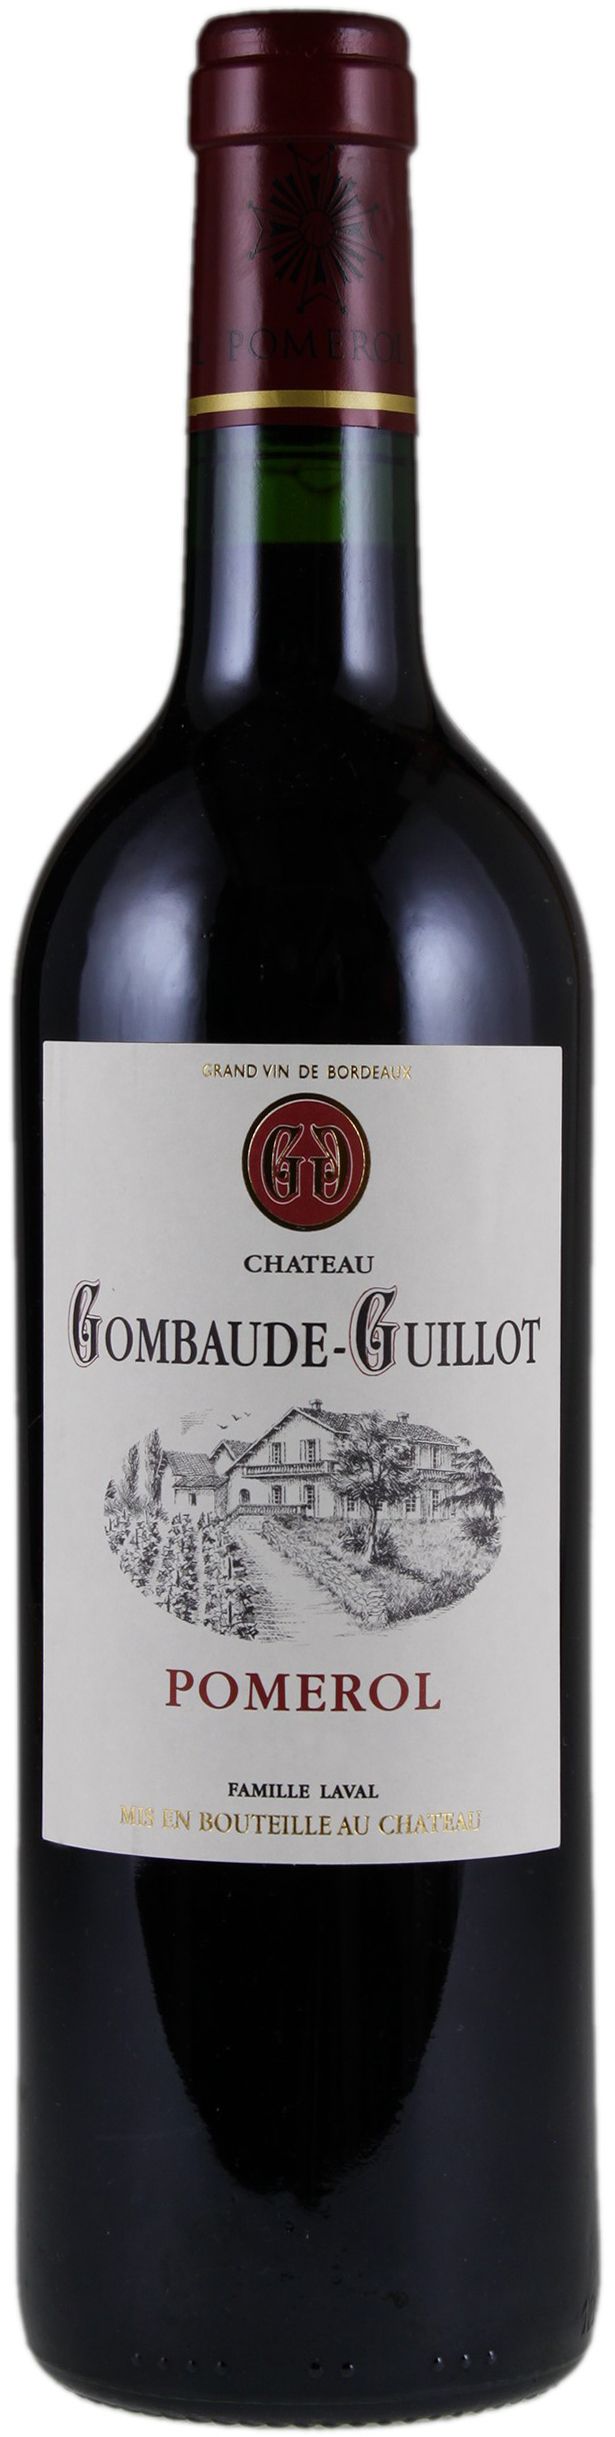 Chateau Gombaude Guillot, 2010